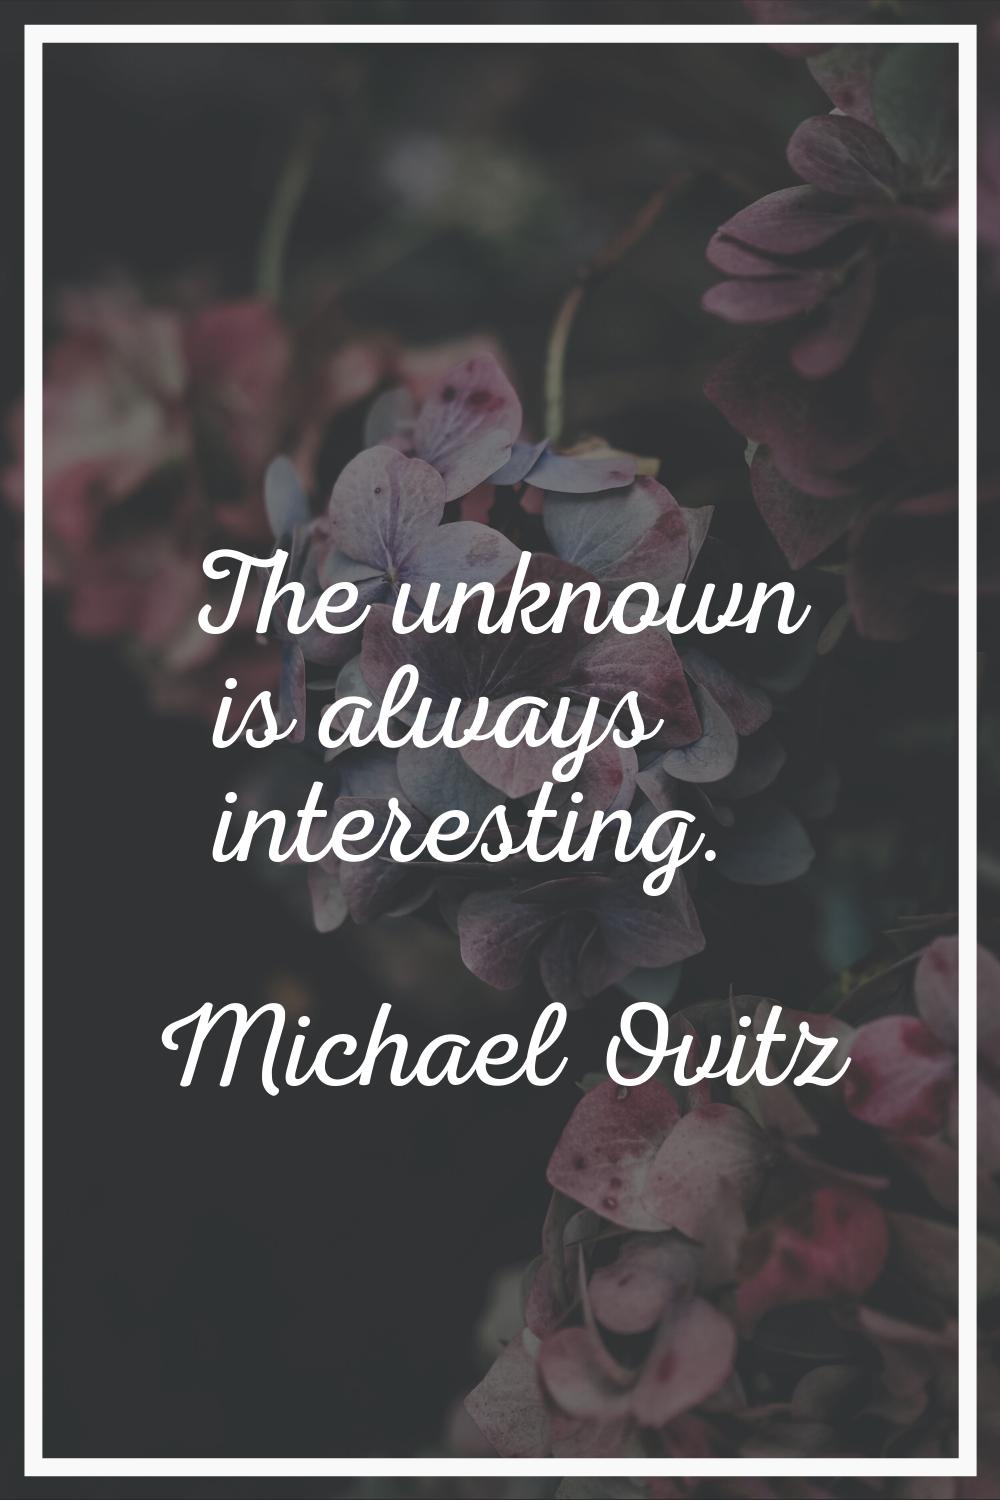 The unknown is always interesting.